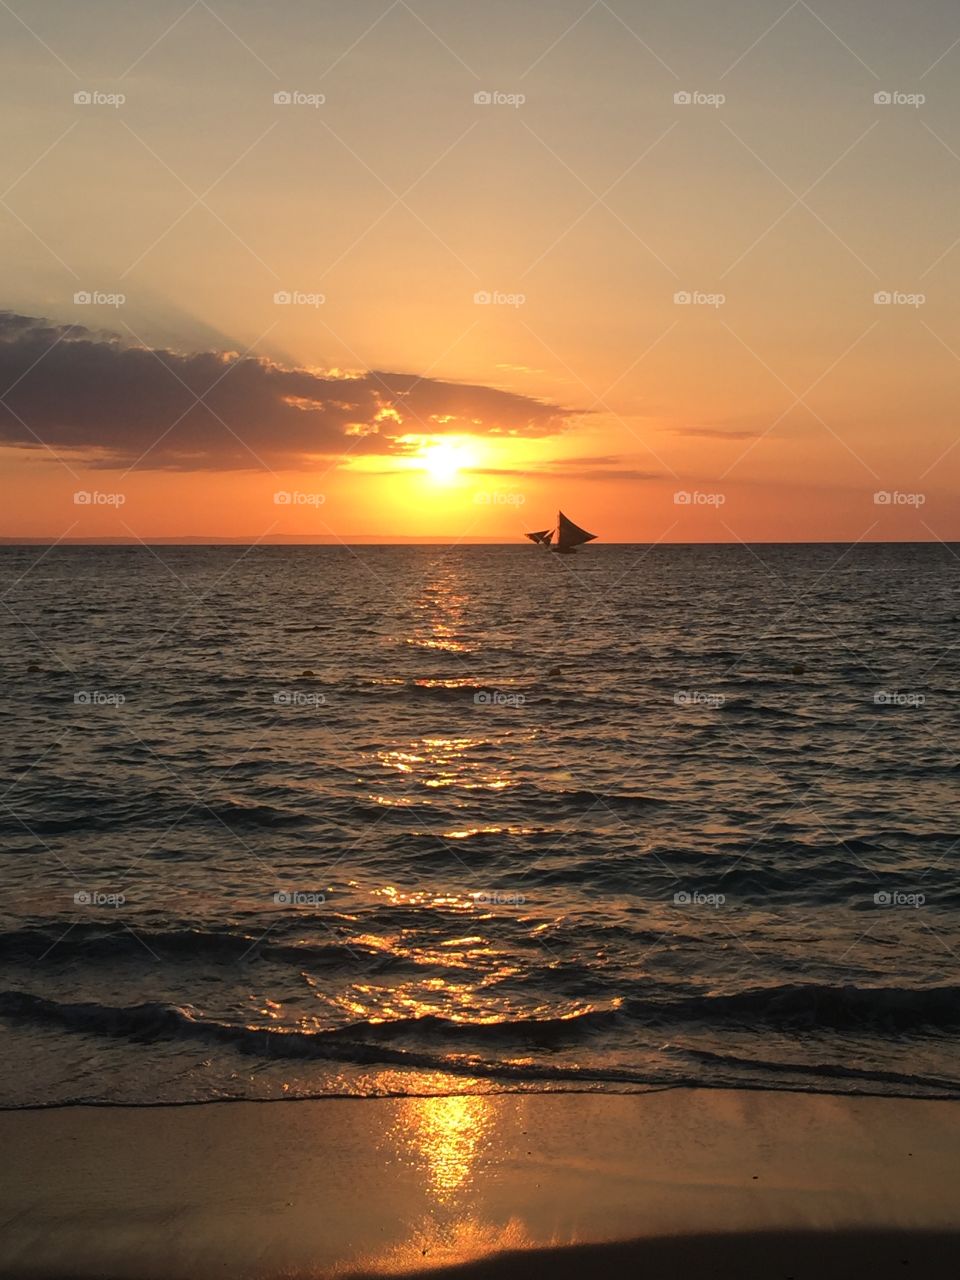 Beach sunset with a sailboat passing by...